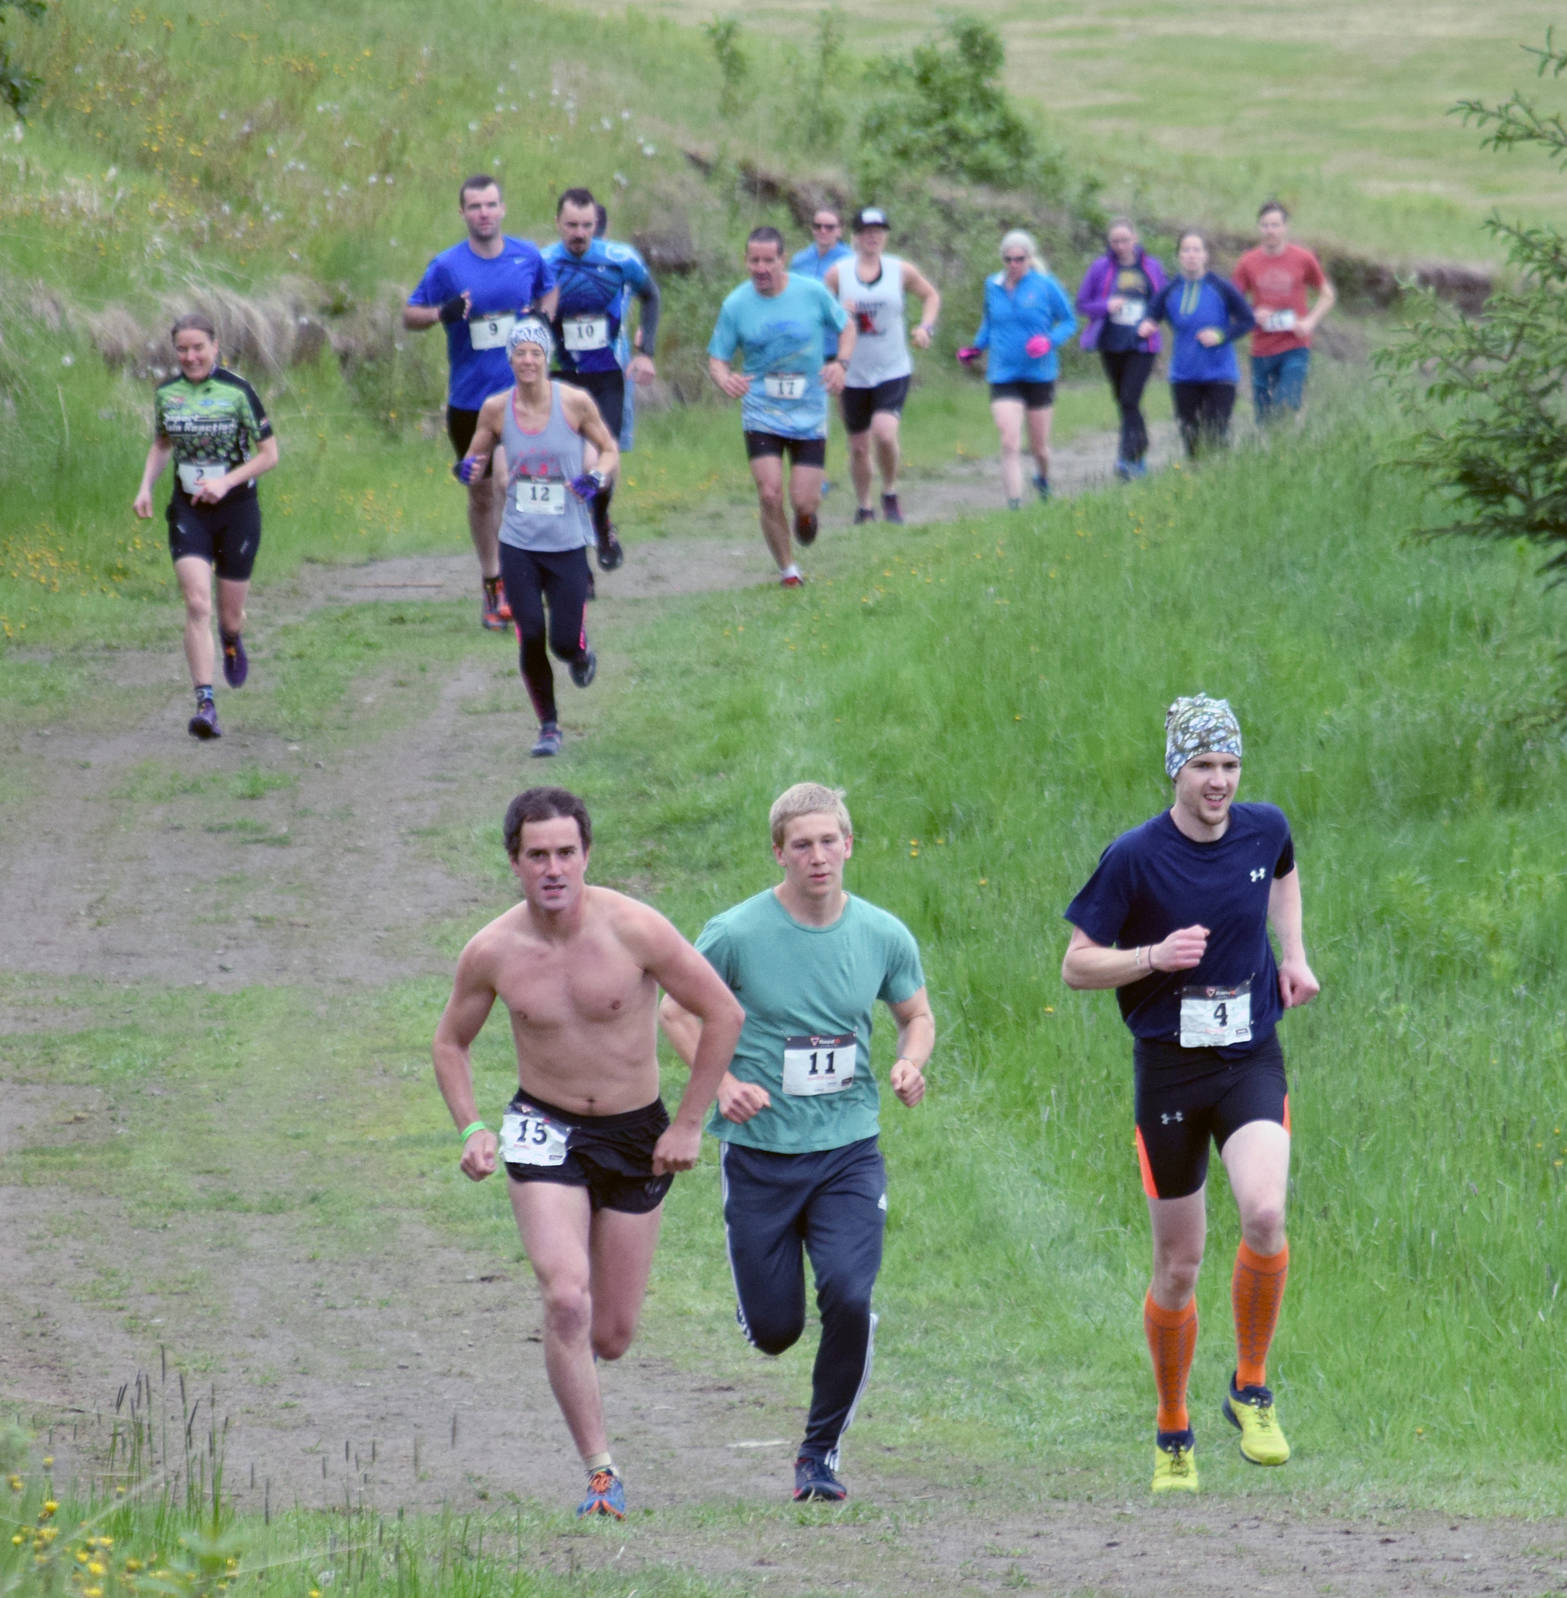 Matt Adams, Karl Danielson and Brian Beeson lead the field at the start of the Snippit Loppet Duathlon on Sunday, June 11, 2017, at Tsalteshi Trails. (Photo by Jeff Helminiak/Peninsula Clarion)